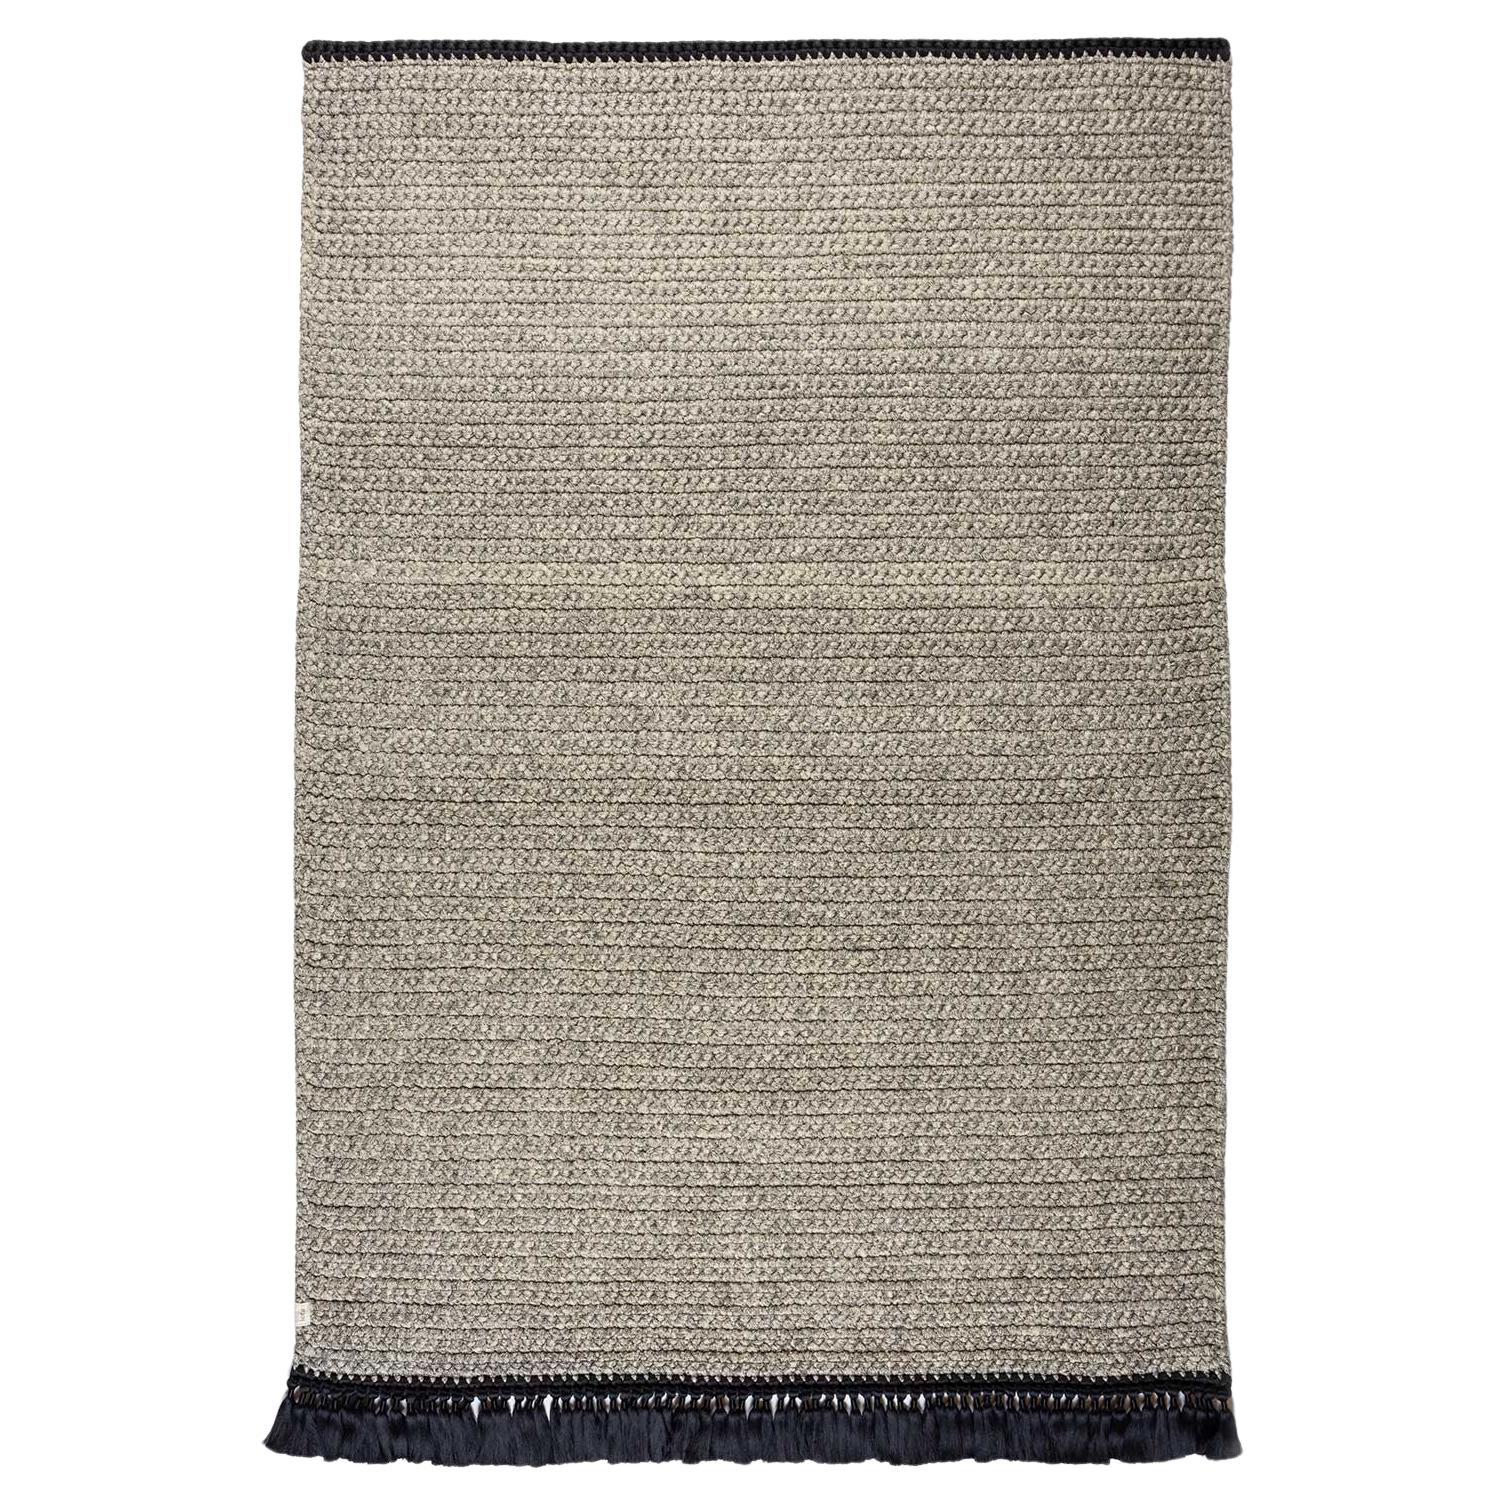 Handmade Crochet Thick Rug in Grey Beige Black Made of Cotton & Polyester For Sale